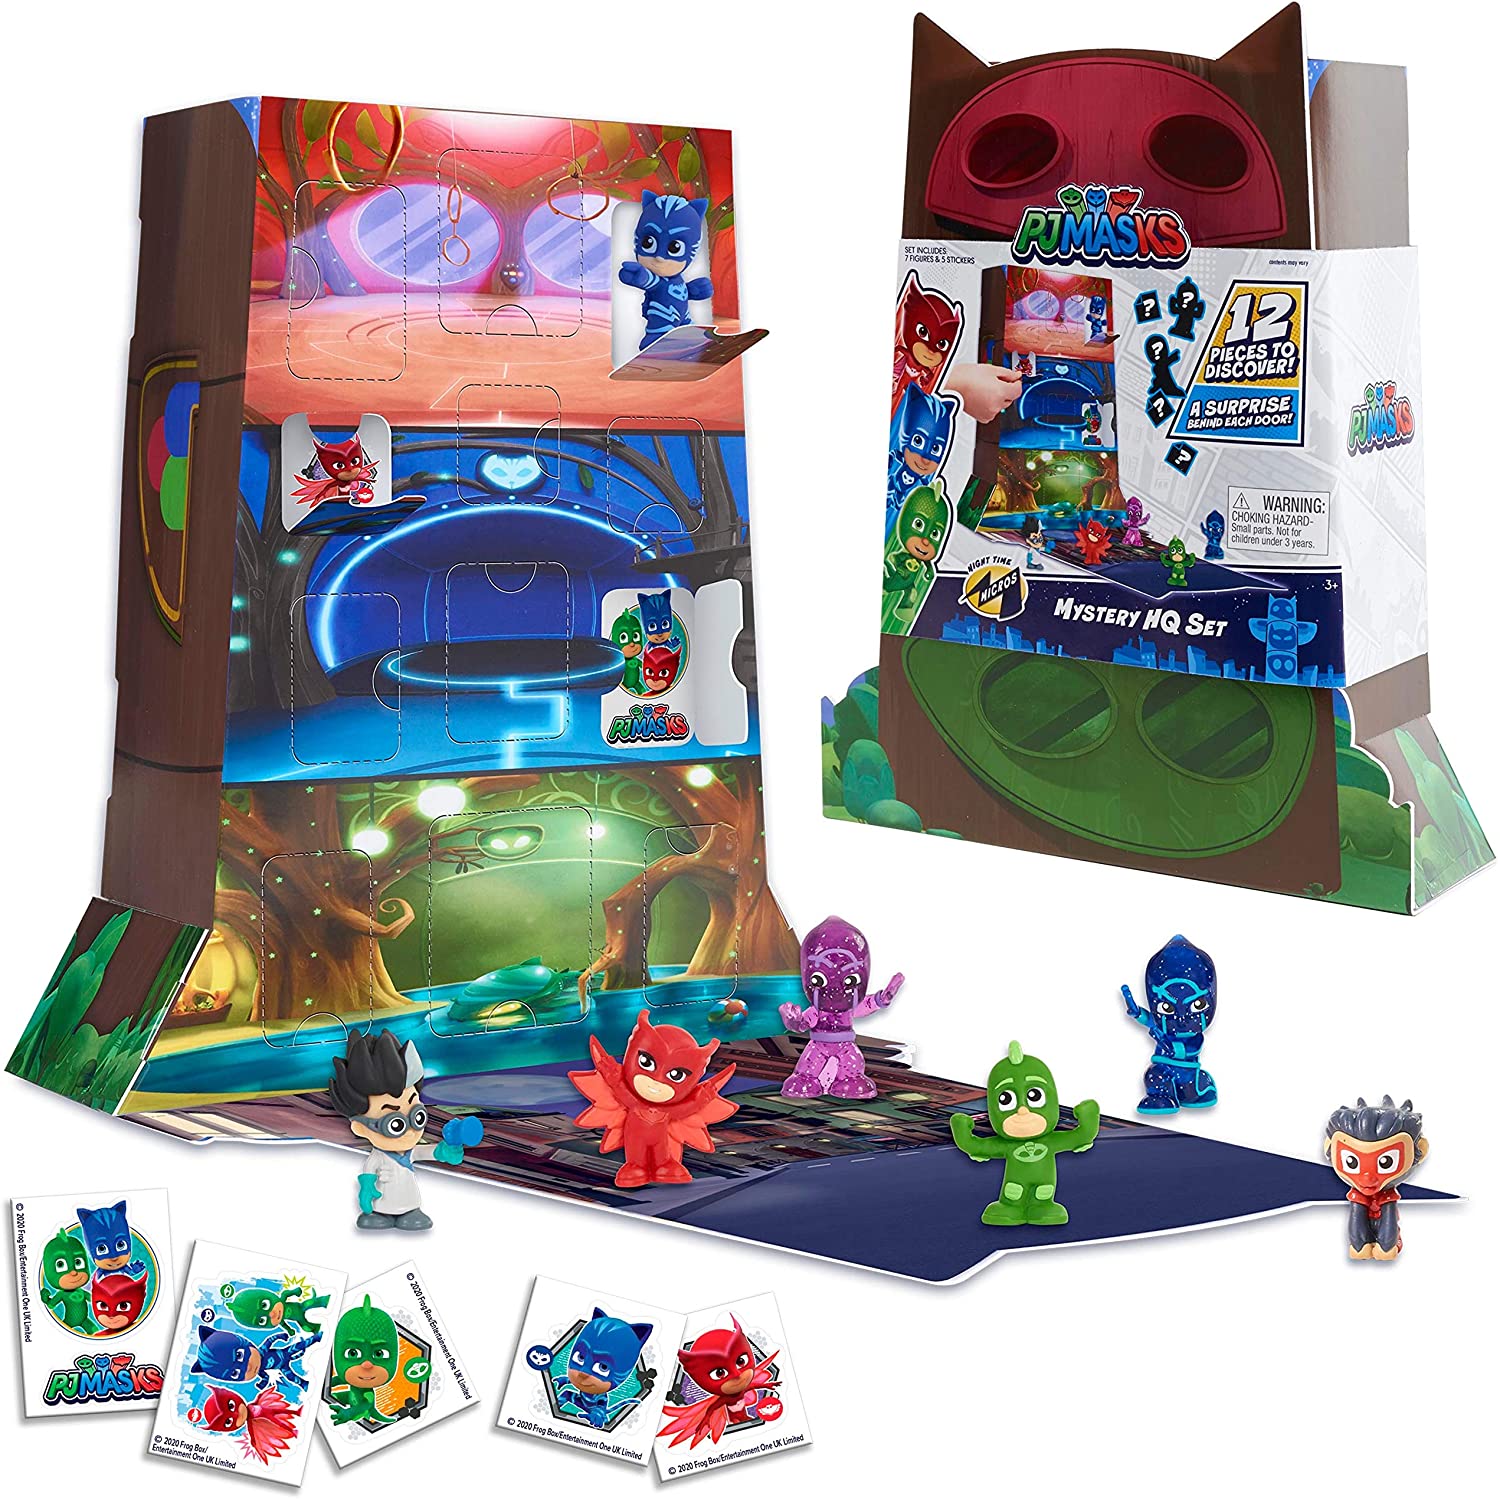 PJ Masks Night Time Micros Mystery HQ Box Set $6.95 + Free Shipping w/ Prime or on $25+